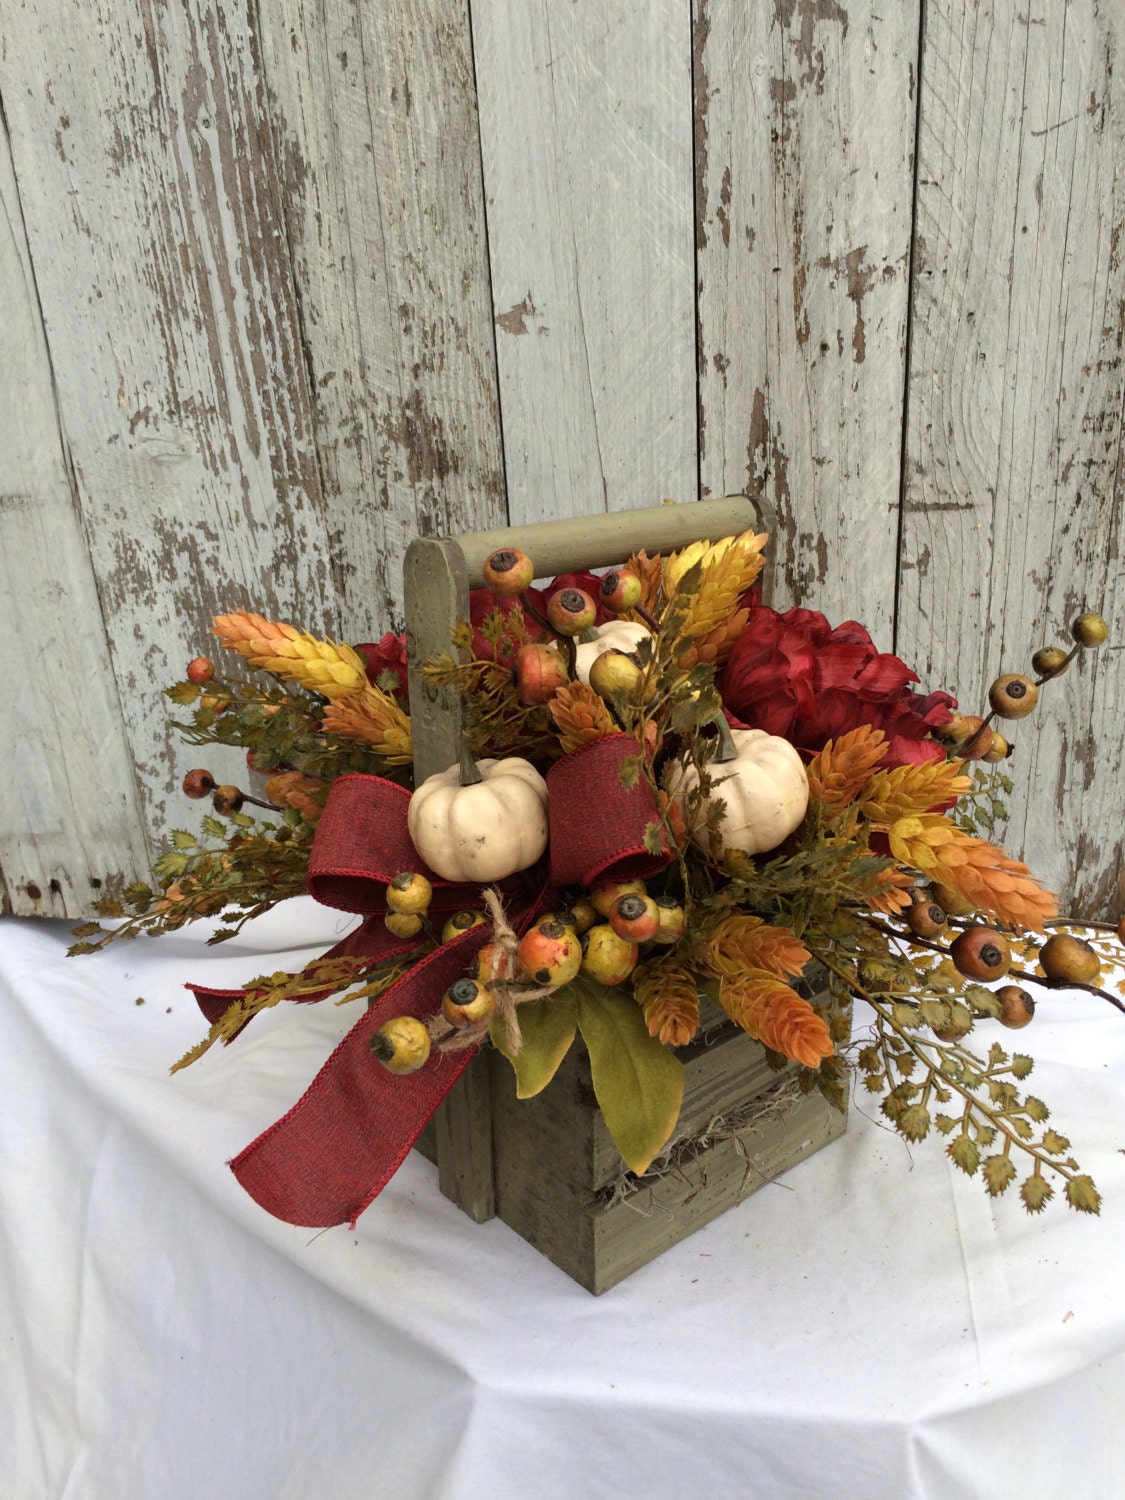 Selection Decorating Table Ideas For Fall Johnstown-Altoona PA